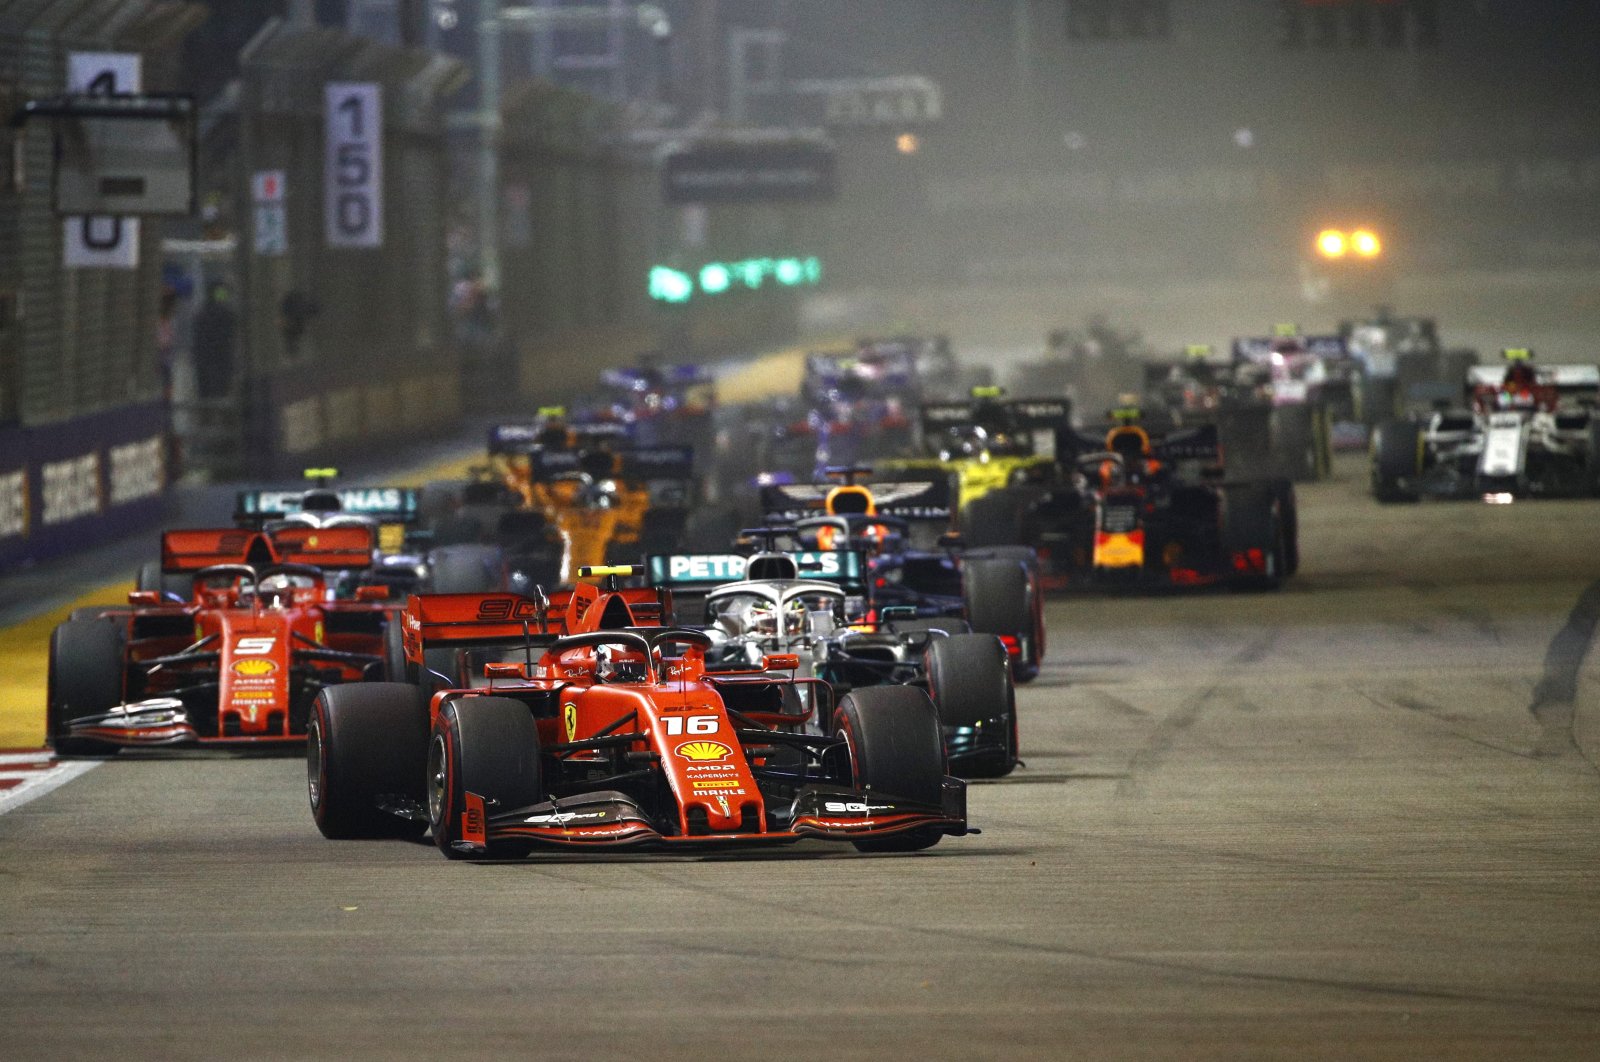 Ferrari driver Charles Leclerc in the lead during the Singapore Grand Prix race in Singapore, Sept. 22, 2019. (AP Photo)